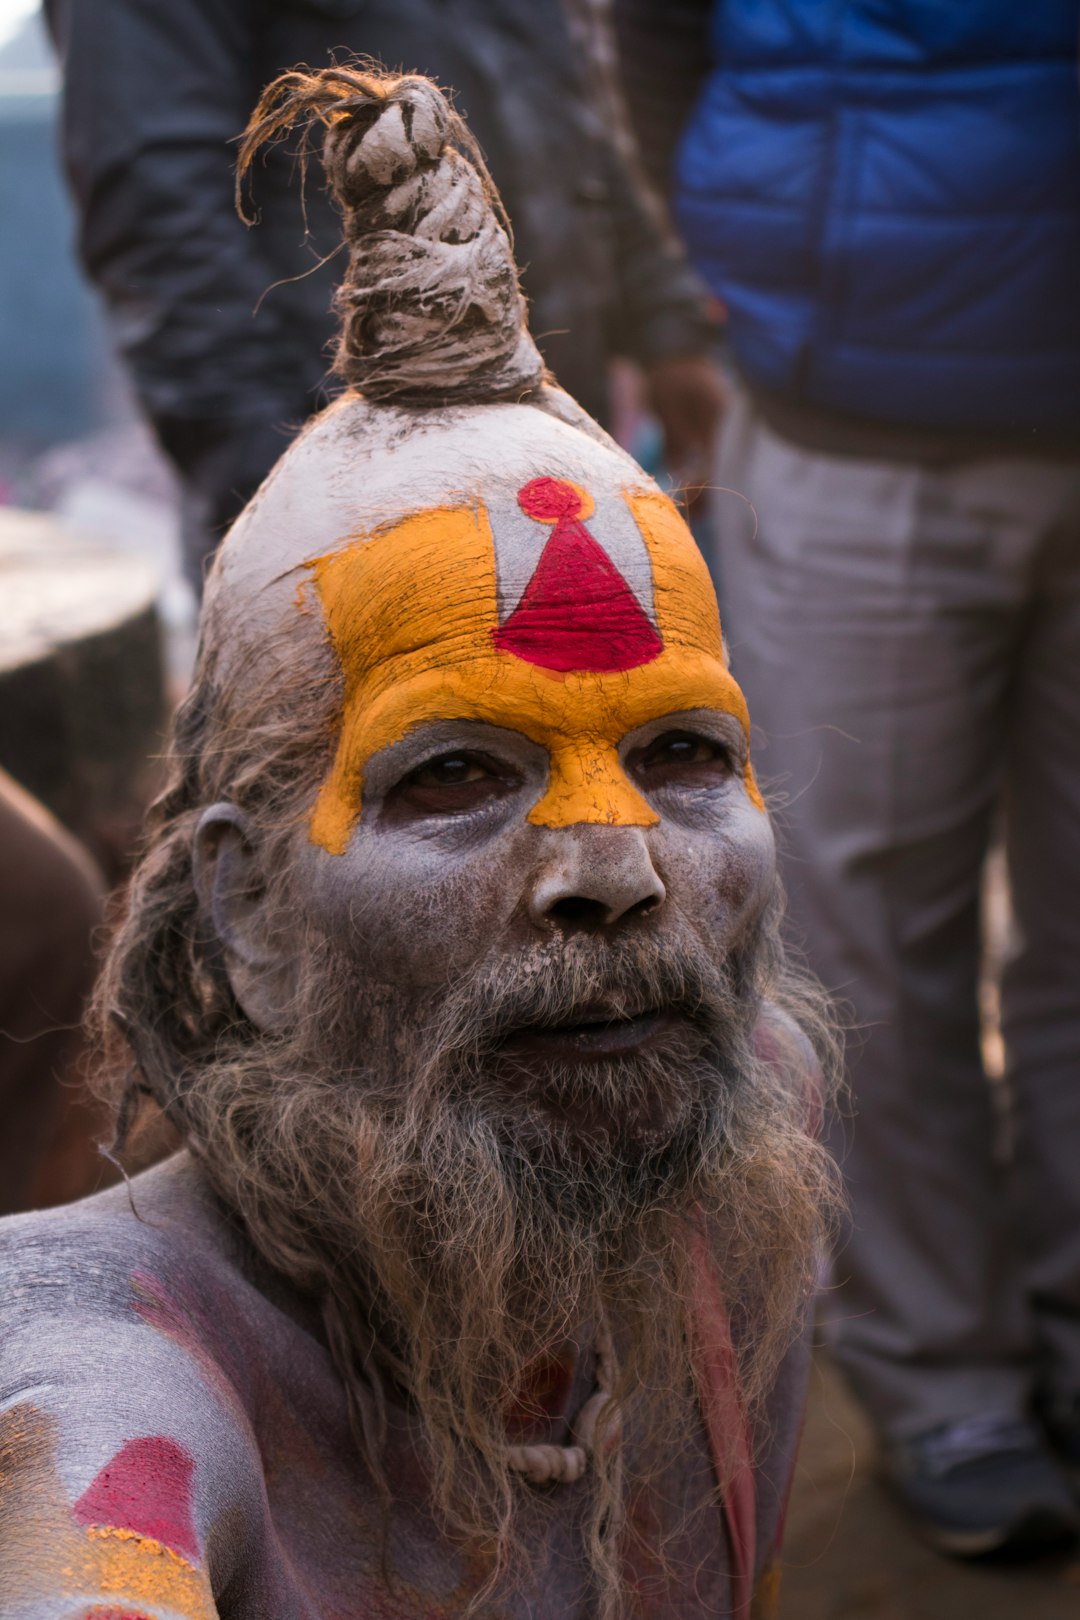 Naga babas are warrior sadhus who live in remote Himalayan caves, only appearing in public rarely during events like Maha Shivaratri. They have renounced the materialistic world and are the most devout of the Shaivite sect. Covered in ash and with matted locks of hair like Lord Shiva, they pose an impressive sight.